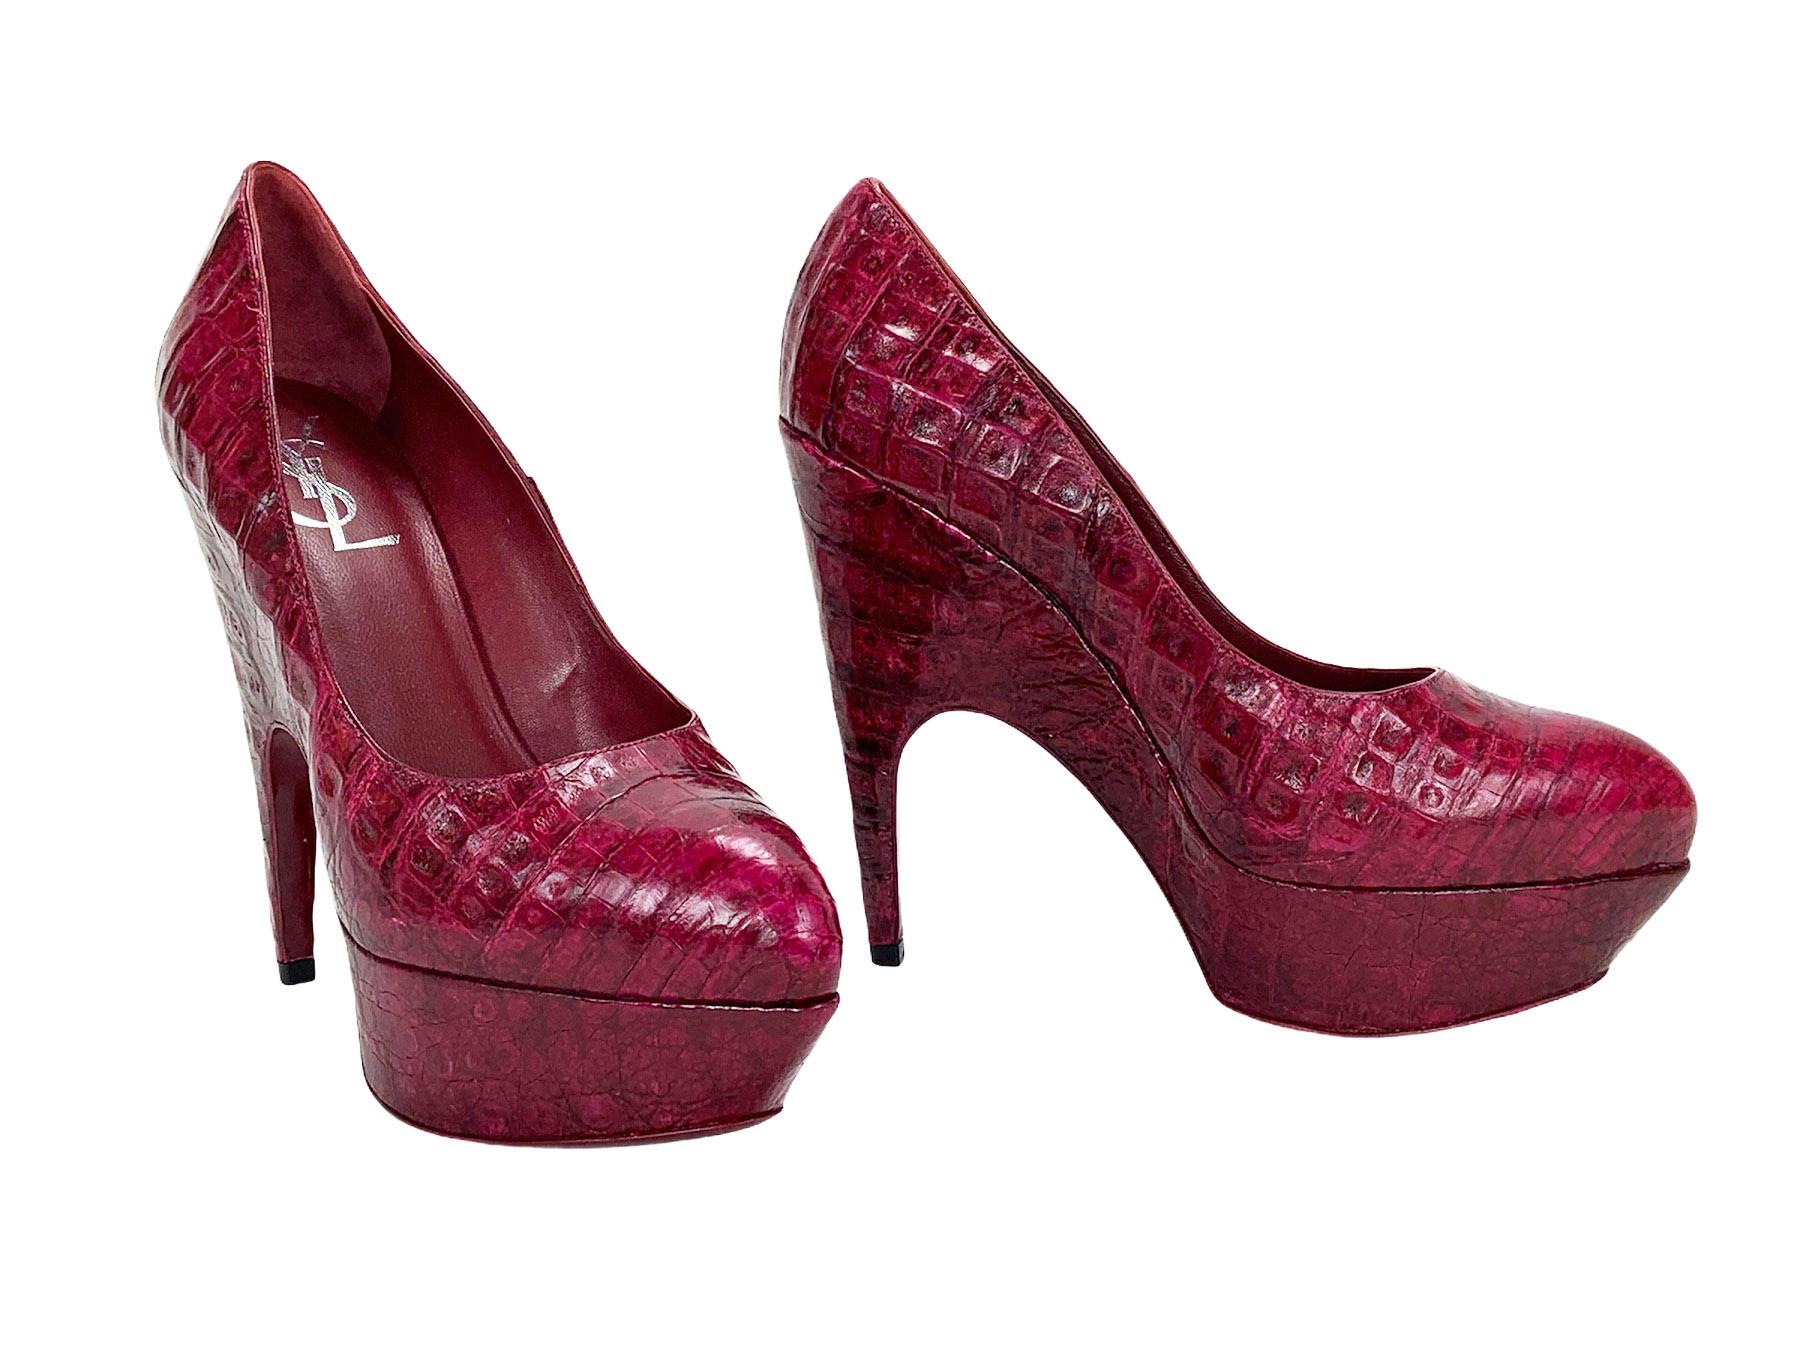 New Yves Saint Laurent Genuine Alligator Platform Shoes
Designer size 38.5 - US 8.5
Raspberry Color
Platform Height - 1.5 inches
Heel Height - 5.5 inches
Padded Leather Insole, Leather Sole.
Made in Italy
Retail $2590.00
New without box.